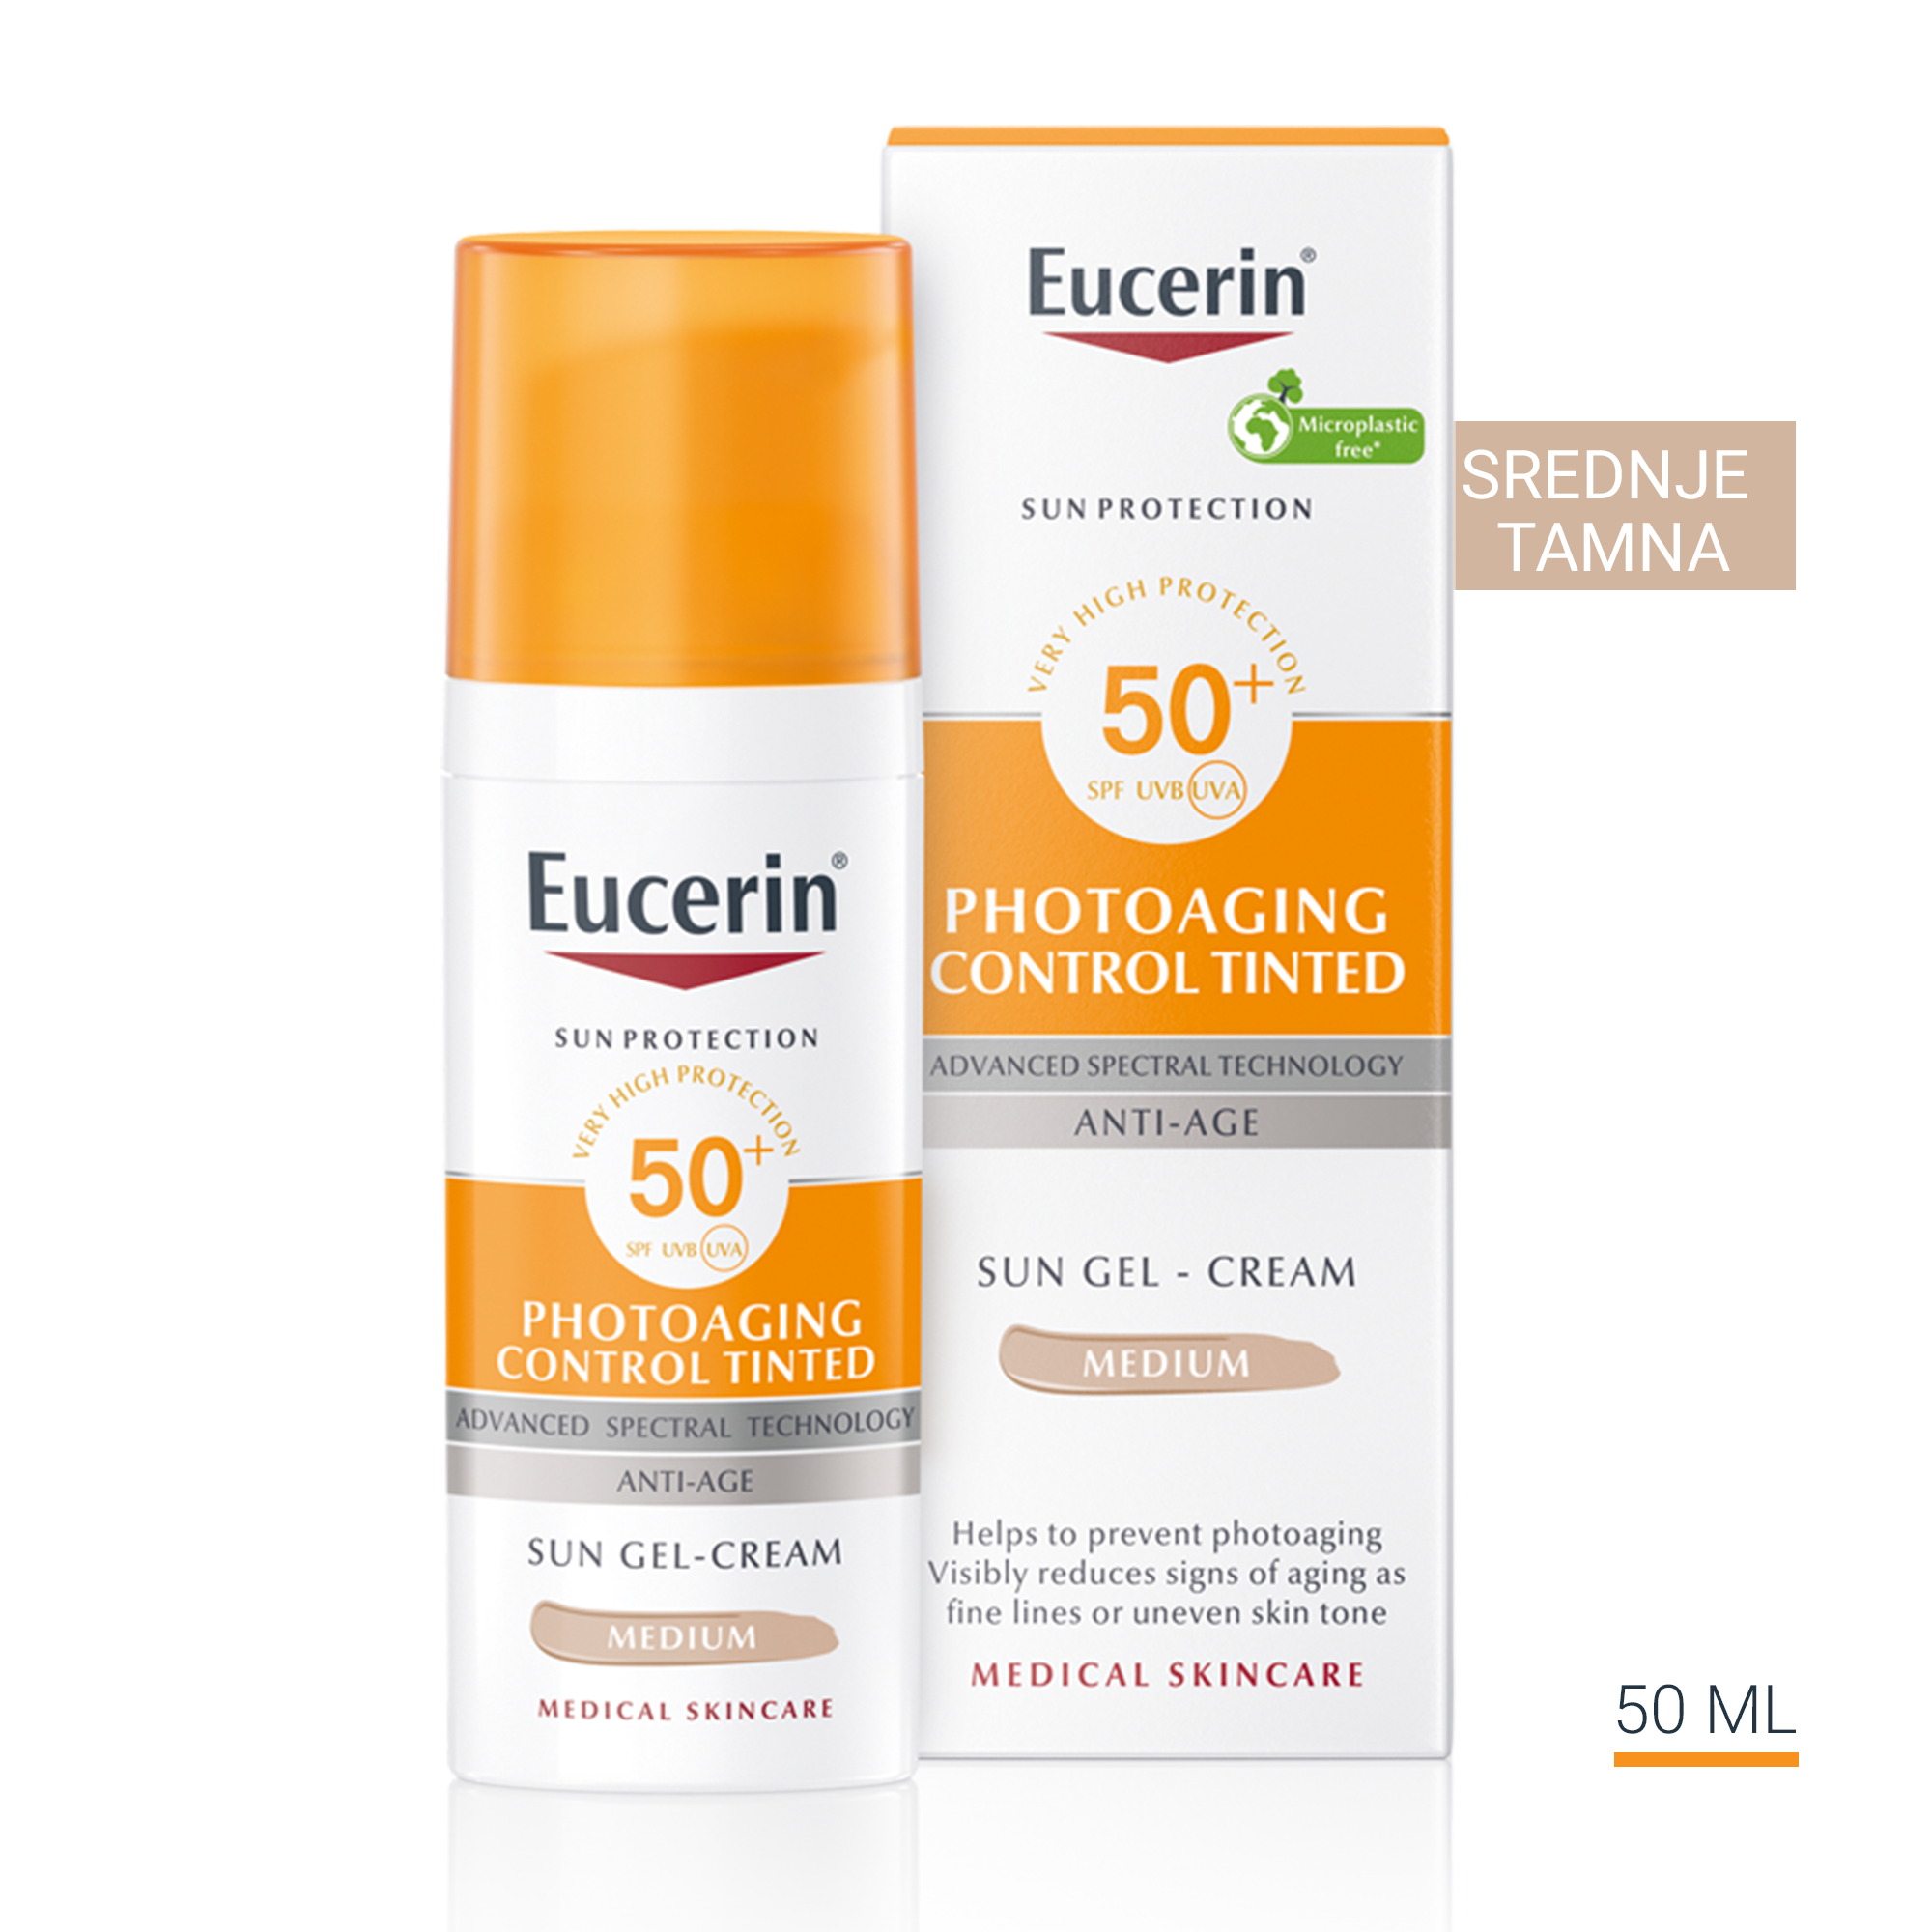 92% of woman say Eucerin Sun Protection Photoaging Control Tinted SPF 50+ Medium instantly unifies complexion. 